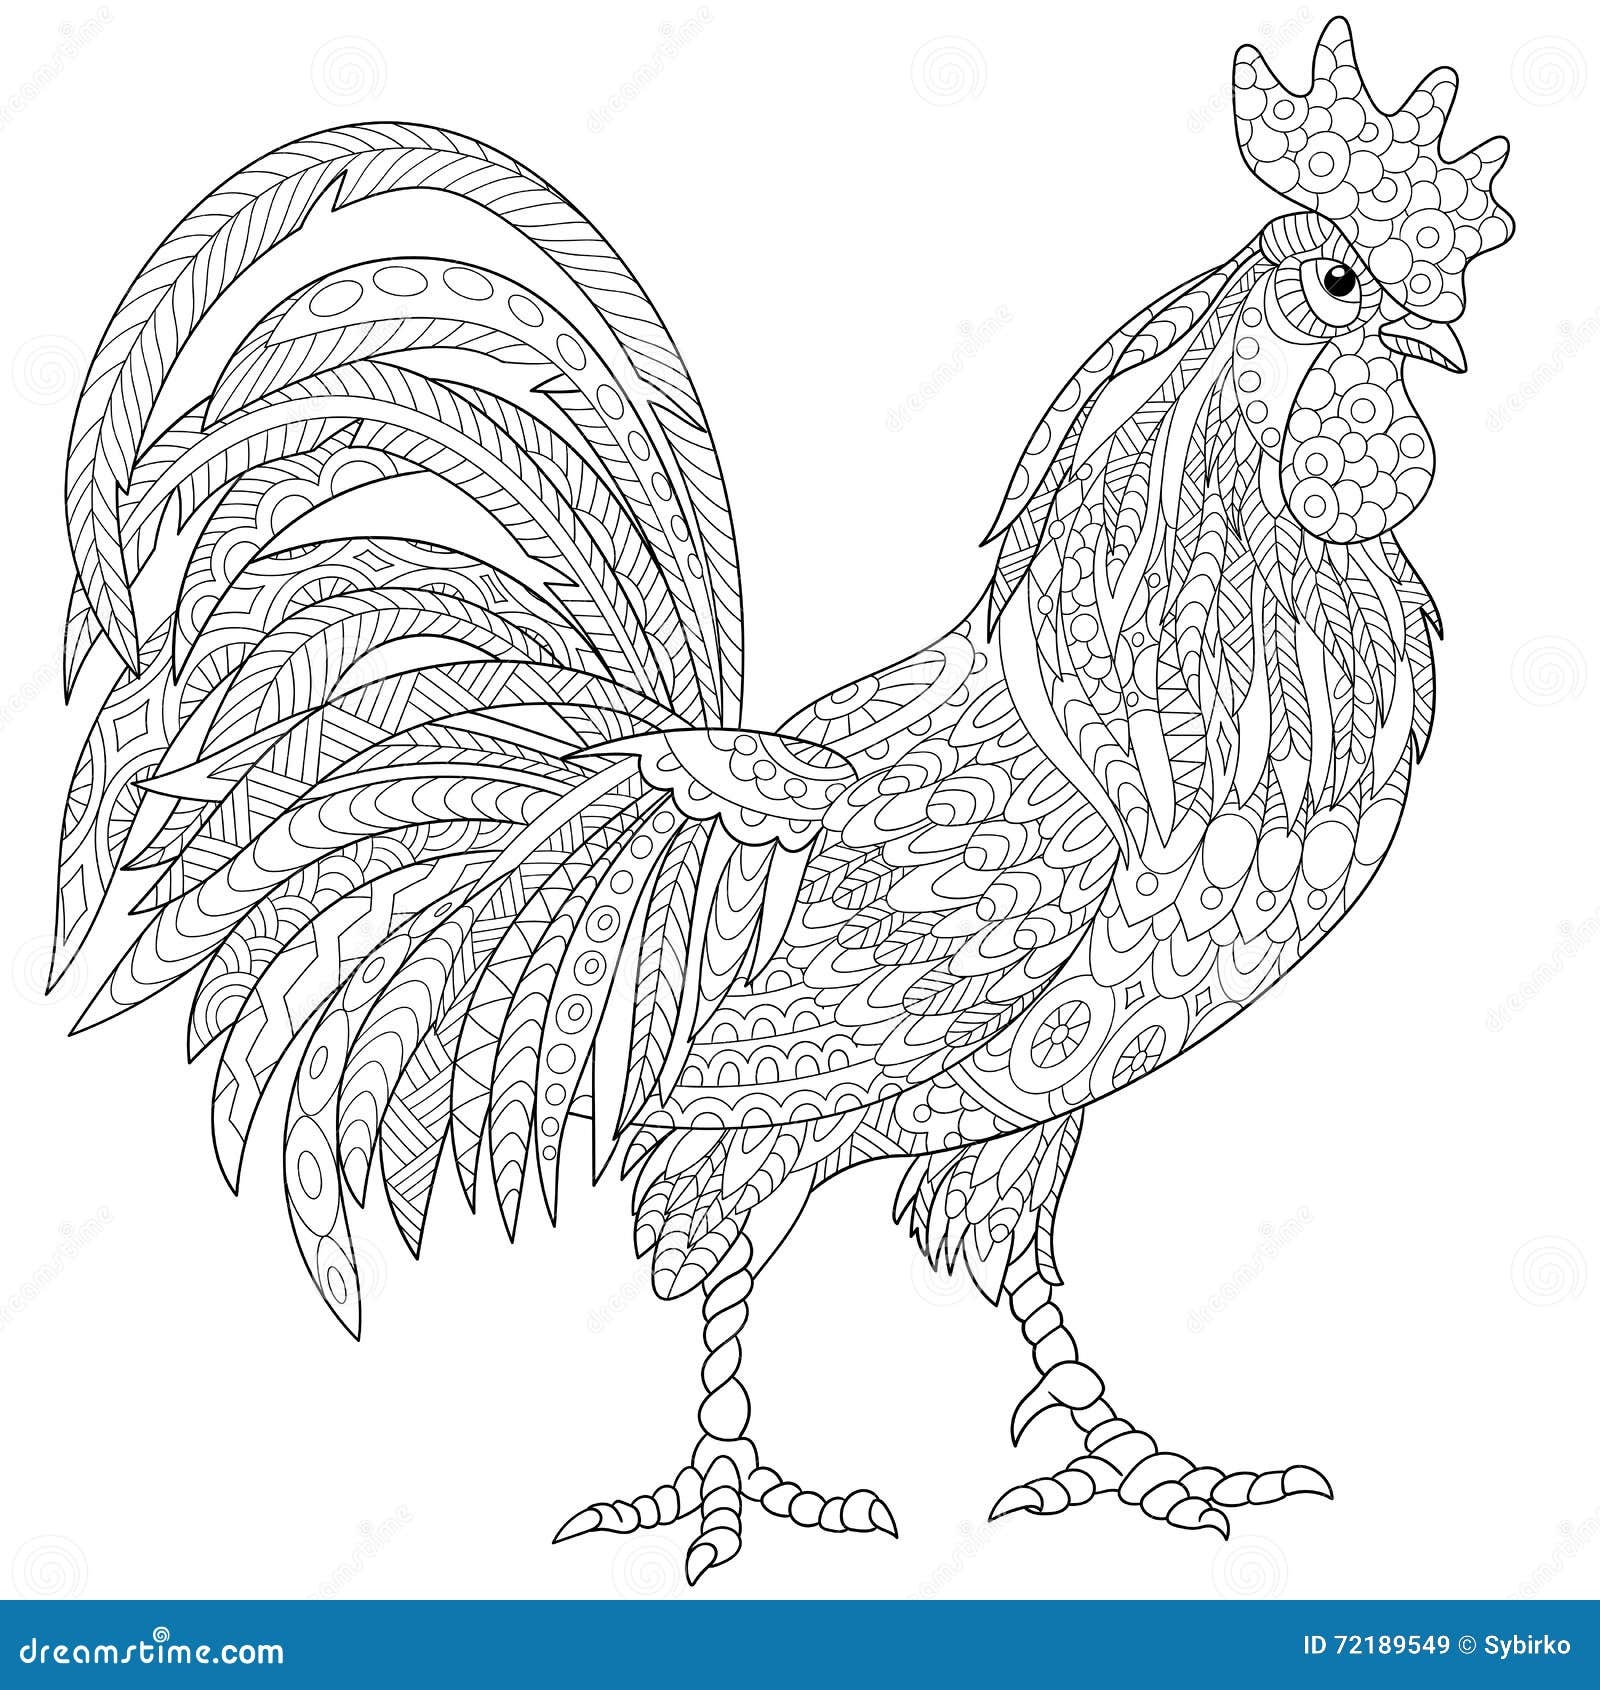 Rooster adult coloring page stock illustrations â rooster adult coloring page stock illustrations vectors clipart